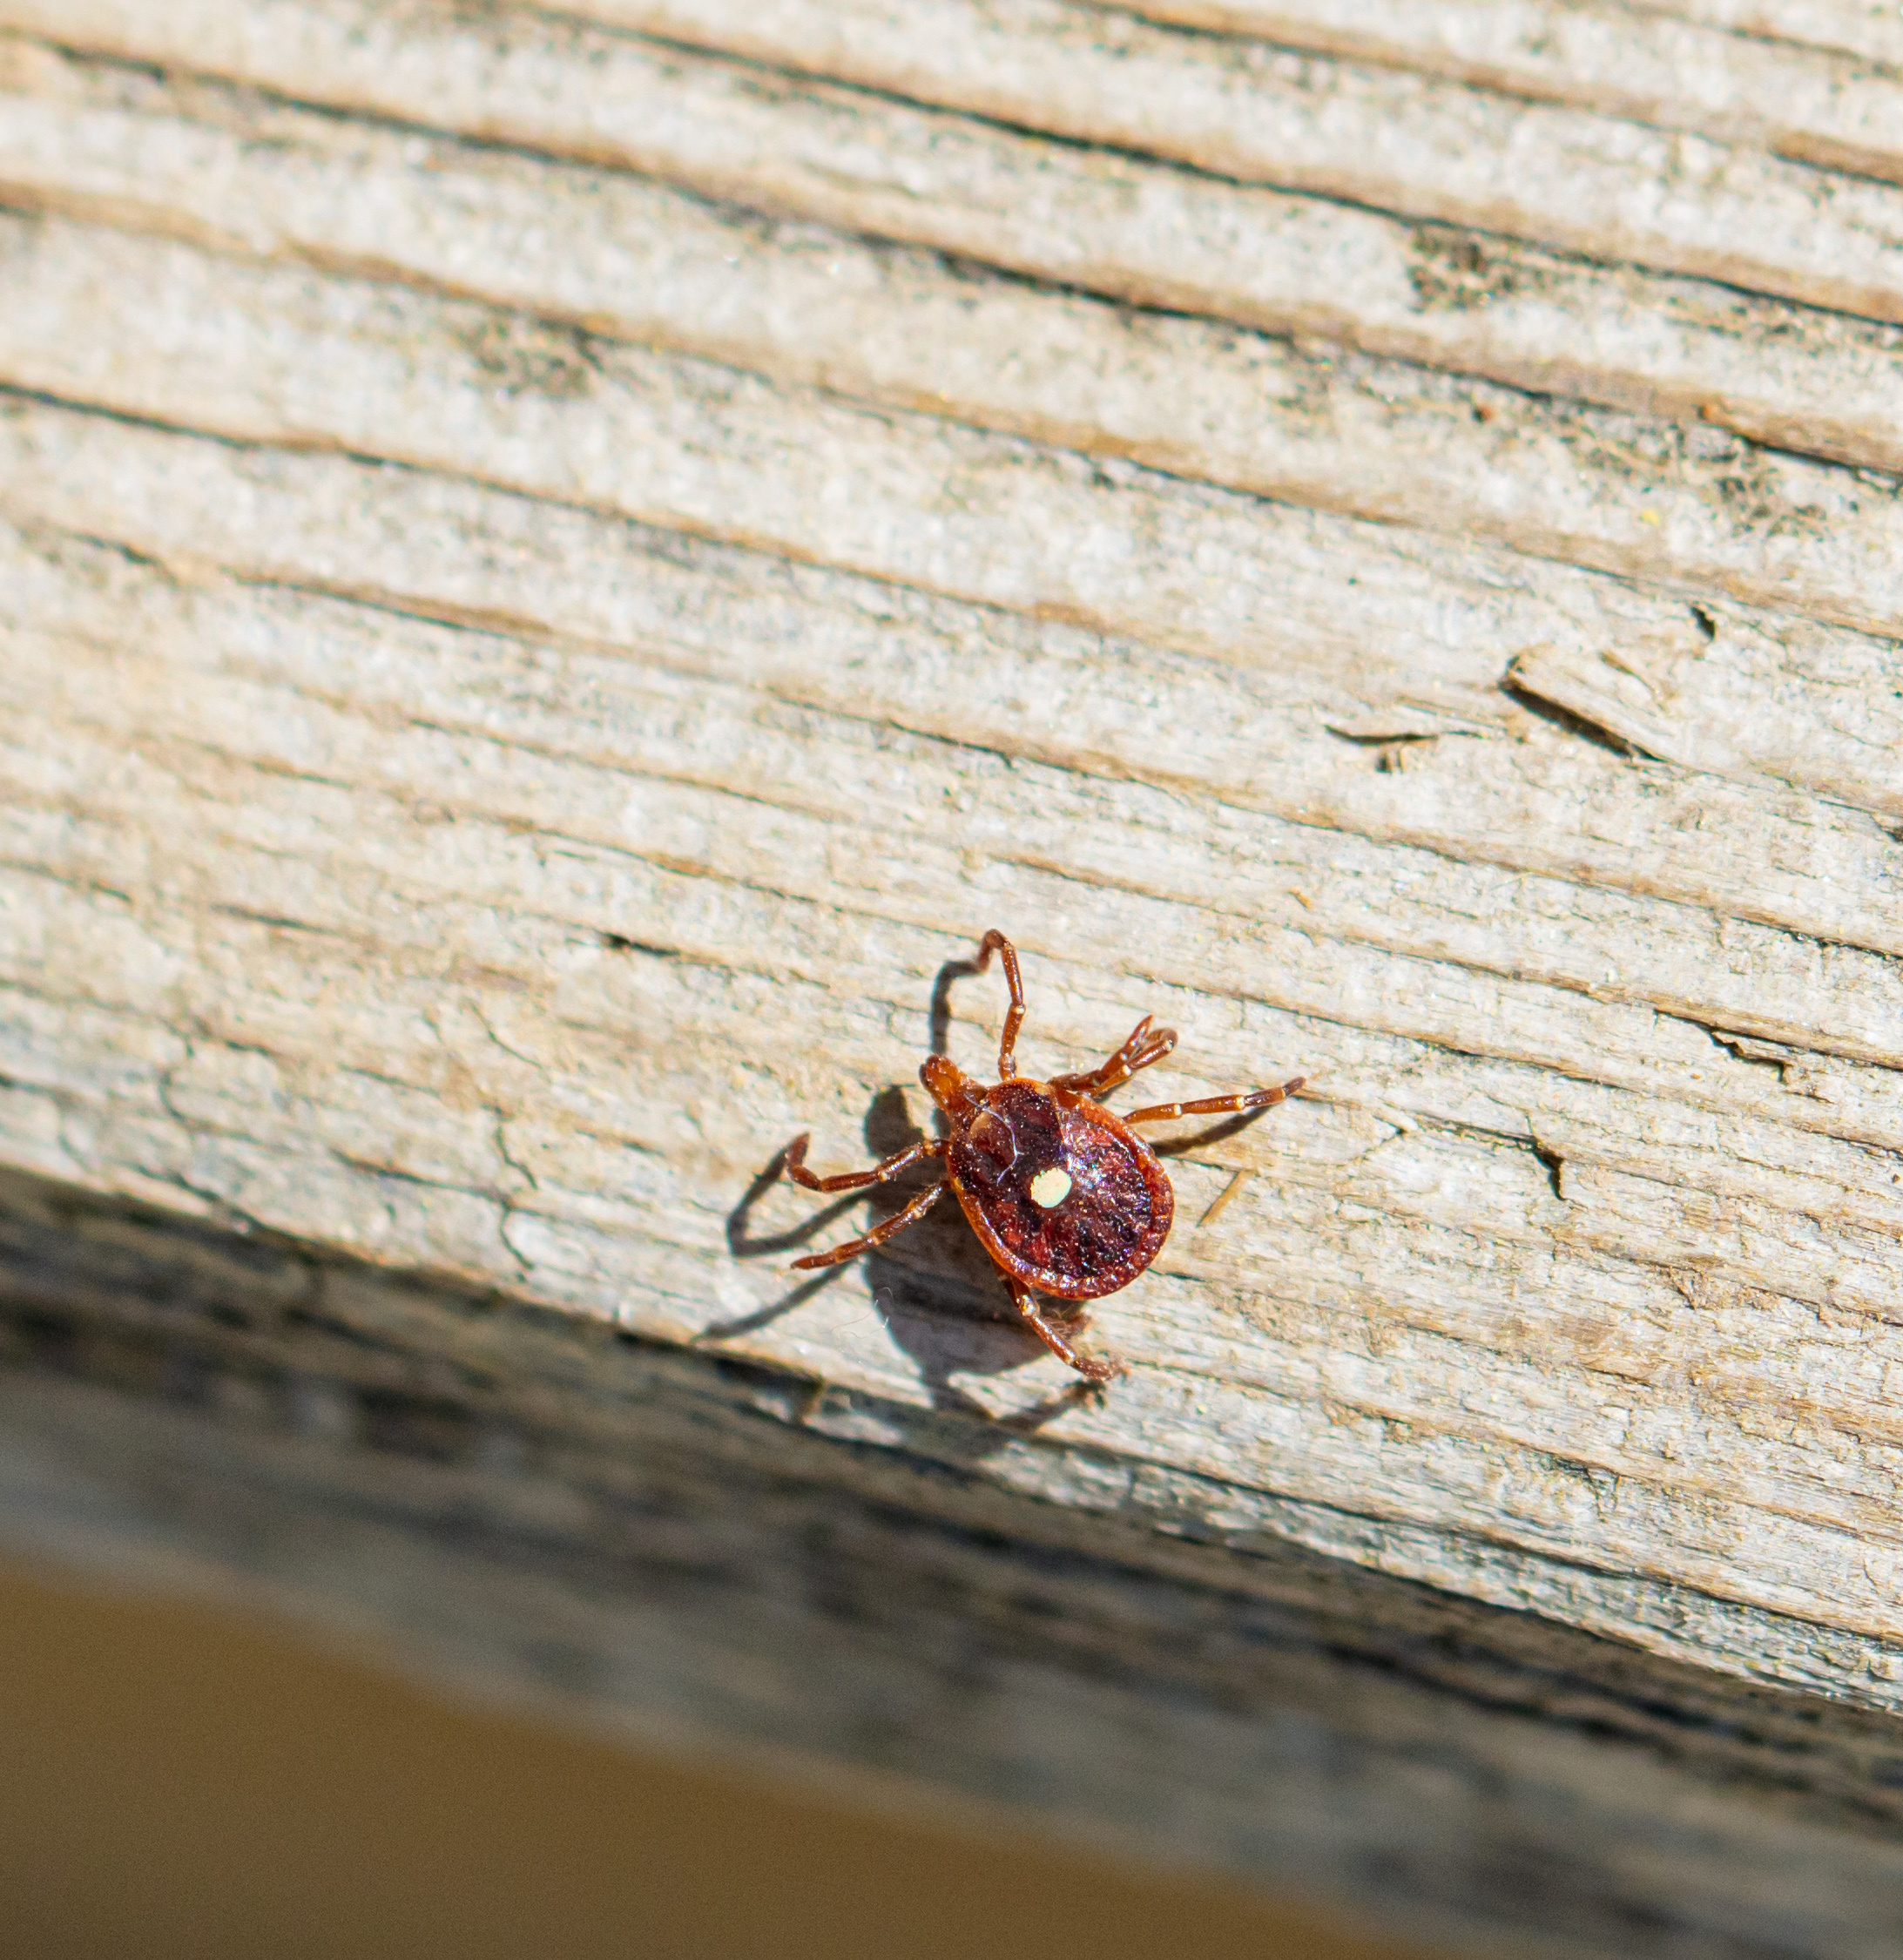 If they are large enough for the naked eye to see, adult blacklegged ticks and lone star ticks have distinctive features. The adult female lone star tick is one of the most recognizable, with the trademark white dot on their backs, while adult blacklegged ticks have reddish-brown bodies and a black shield on their backs.